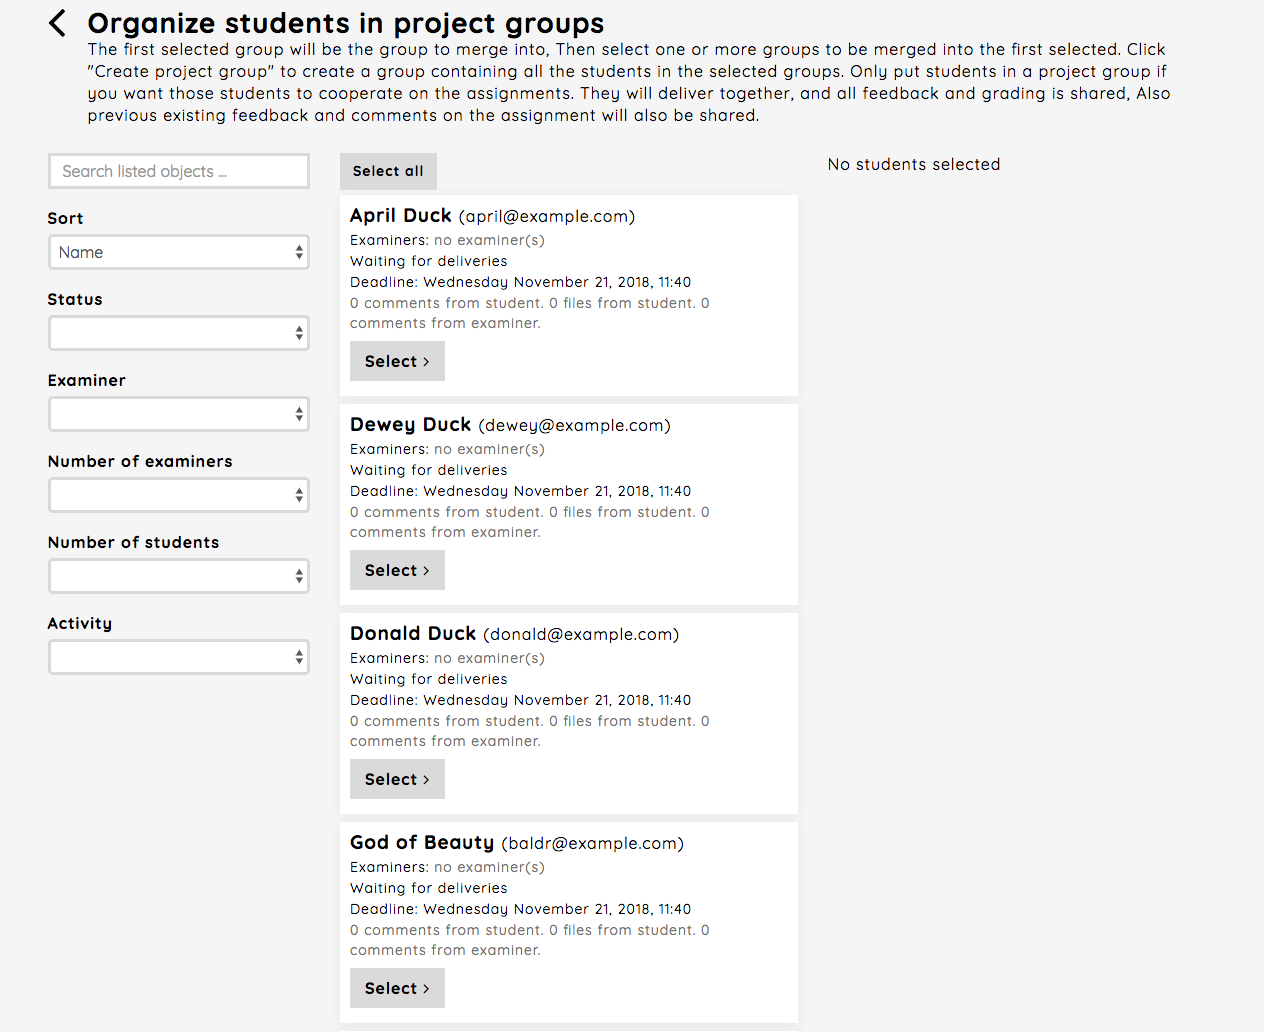 ../../../_images/admin-organize-project-groups-page.png